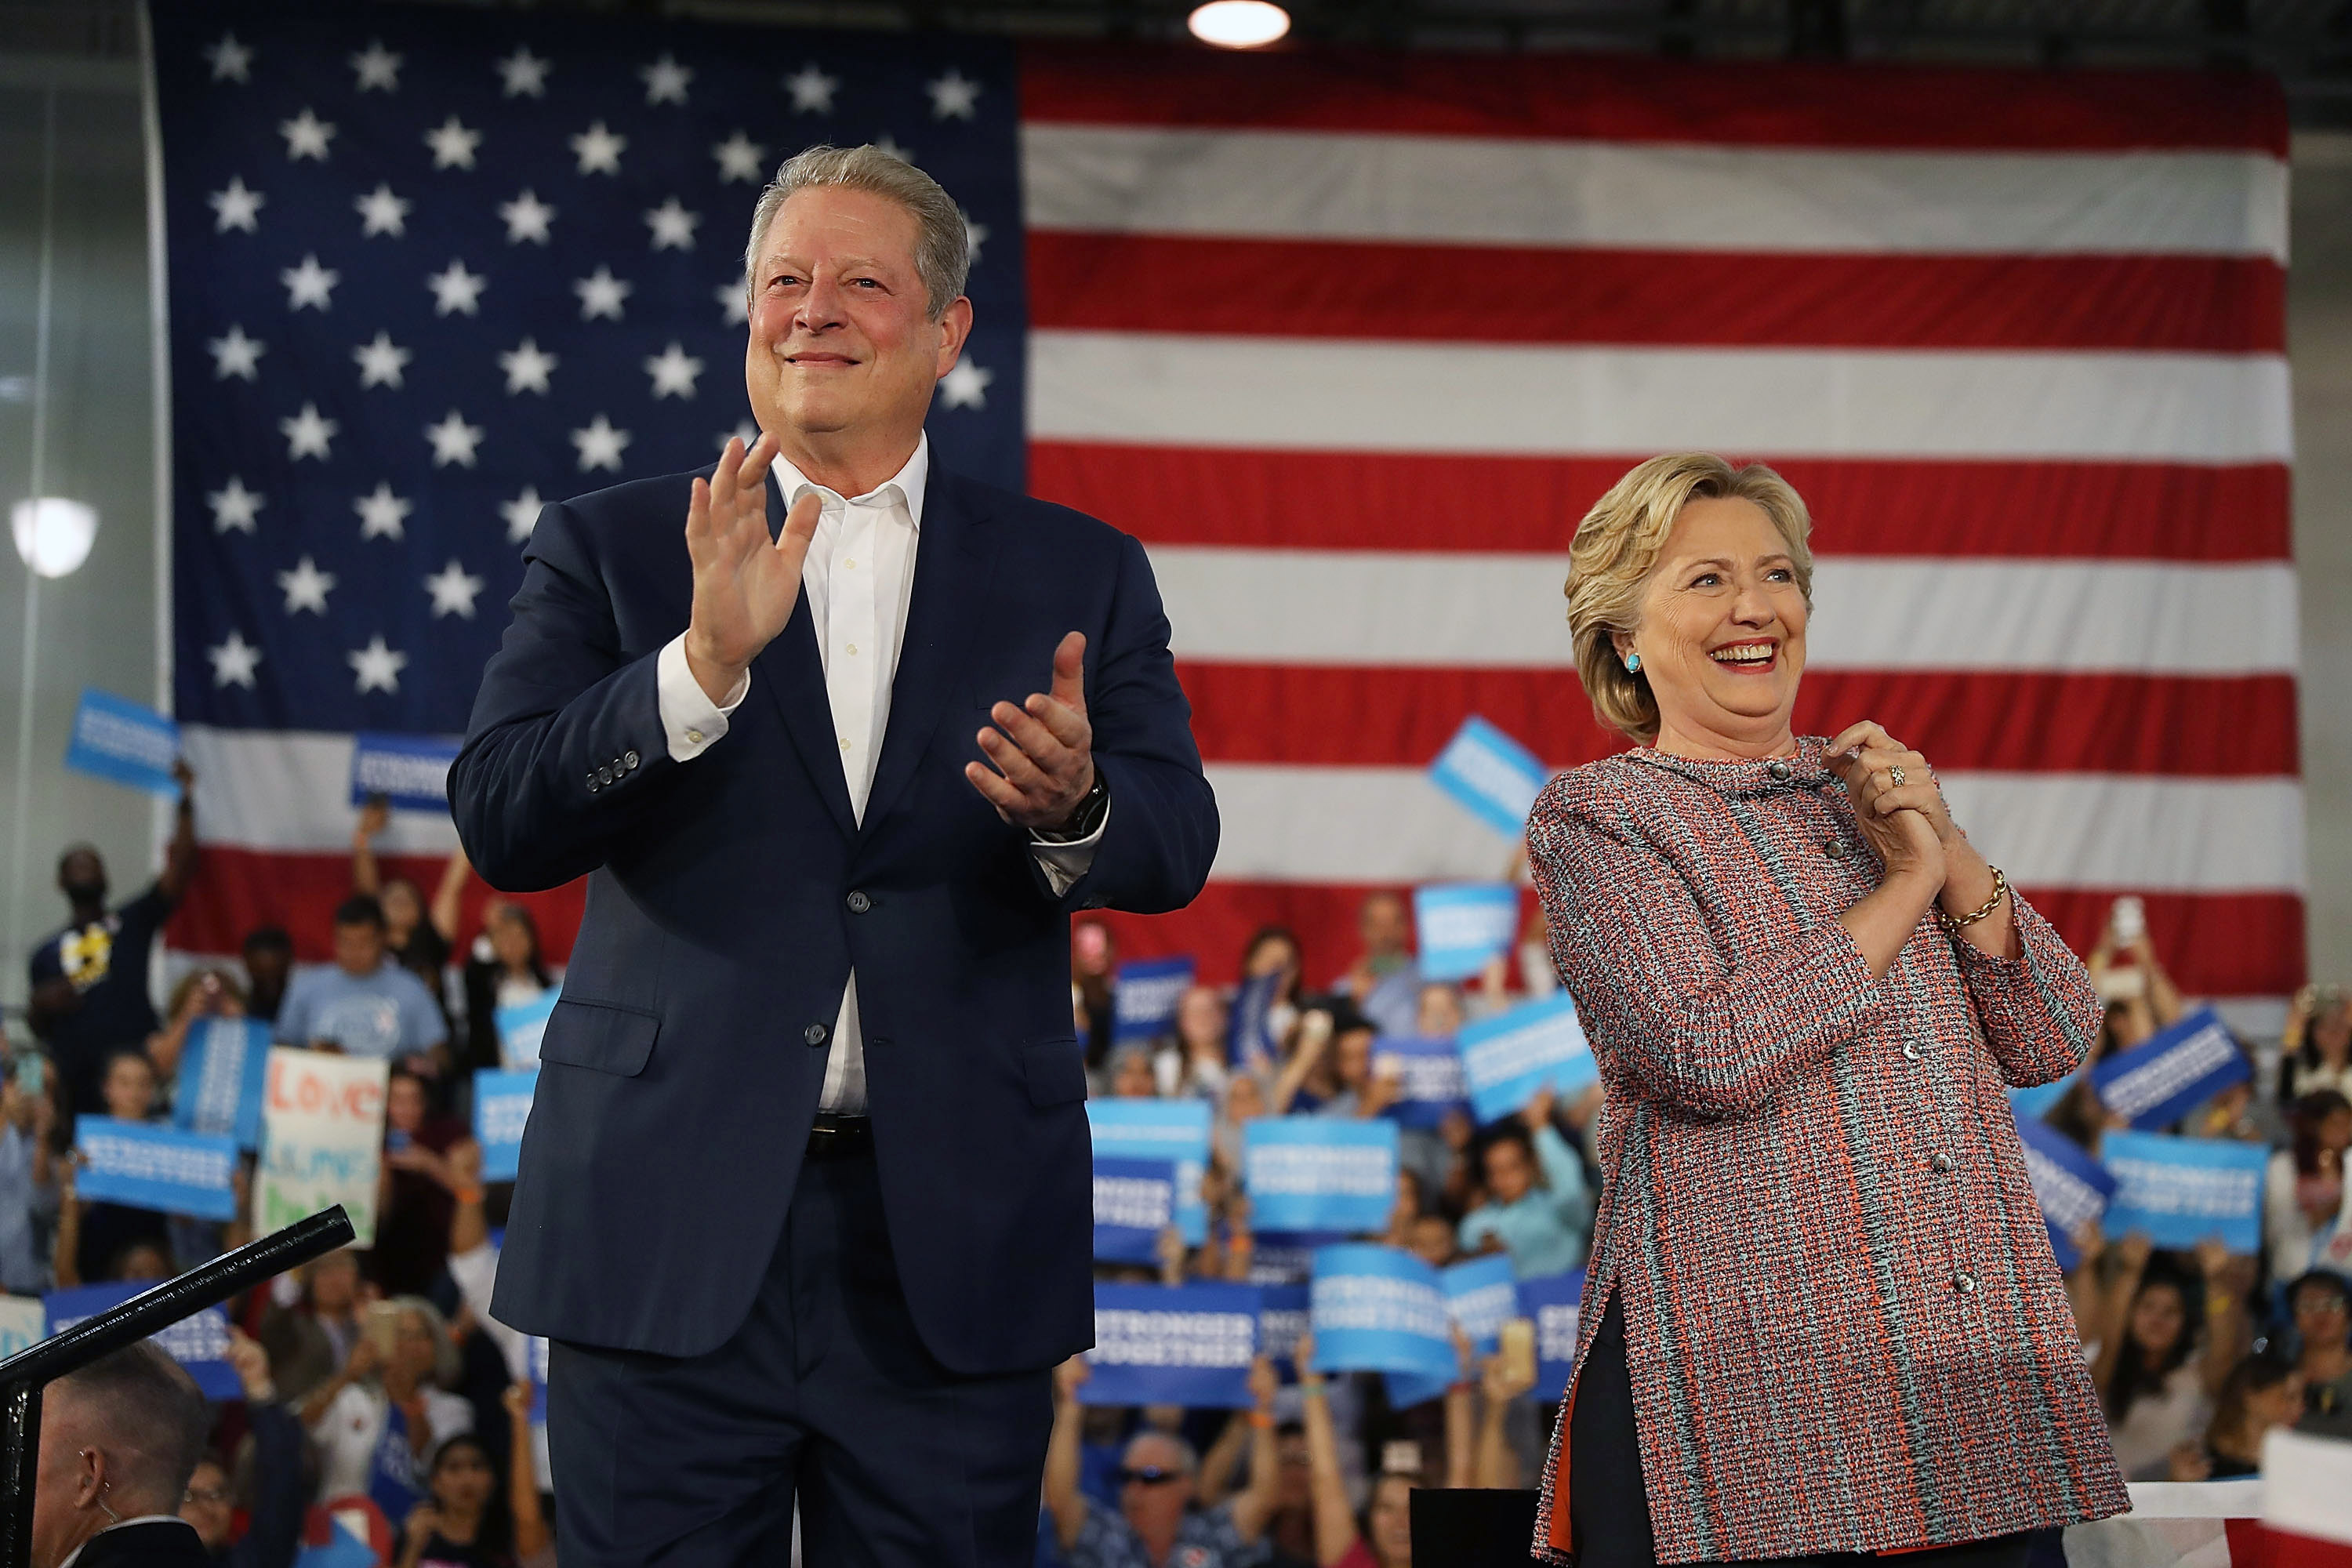 Democratic presidential nominee former Secretary of State Hillary Clinton and former Vice President Al Gore campaign together at the Miami Dade College on Oct. 11. in Miami. (Joe Raedle—Getty Images)